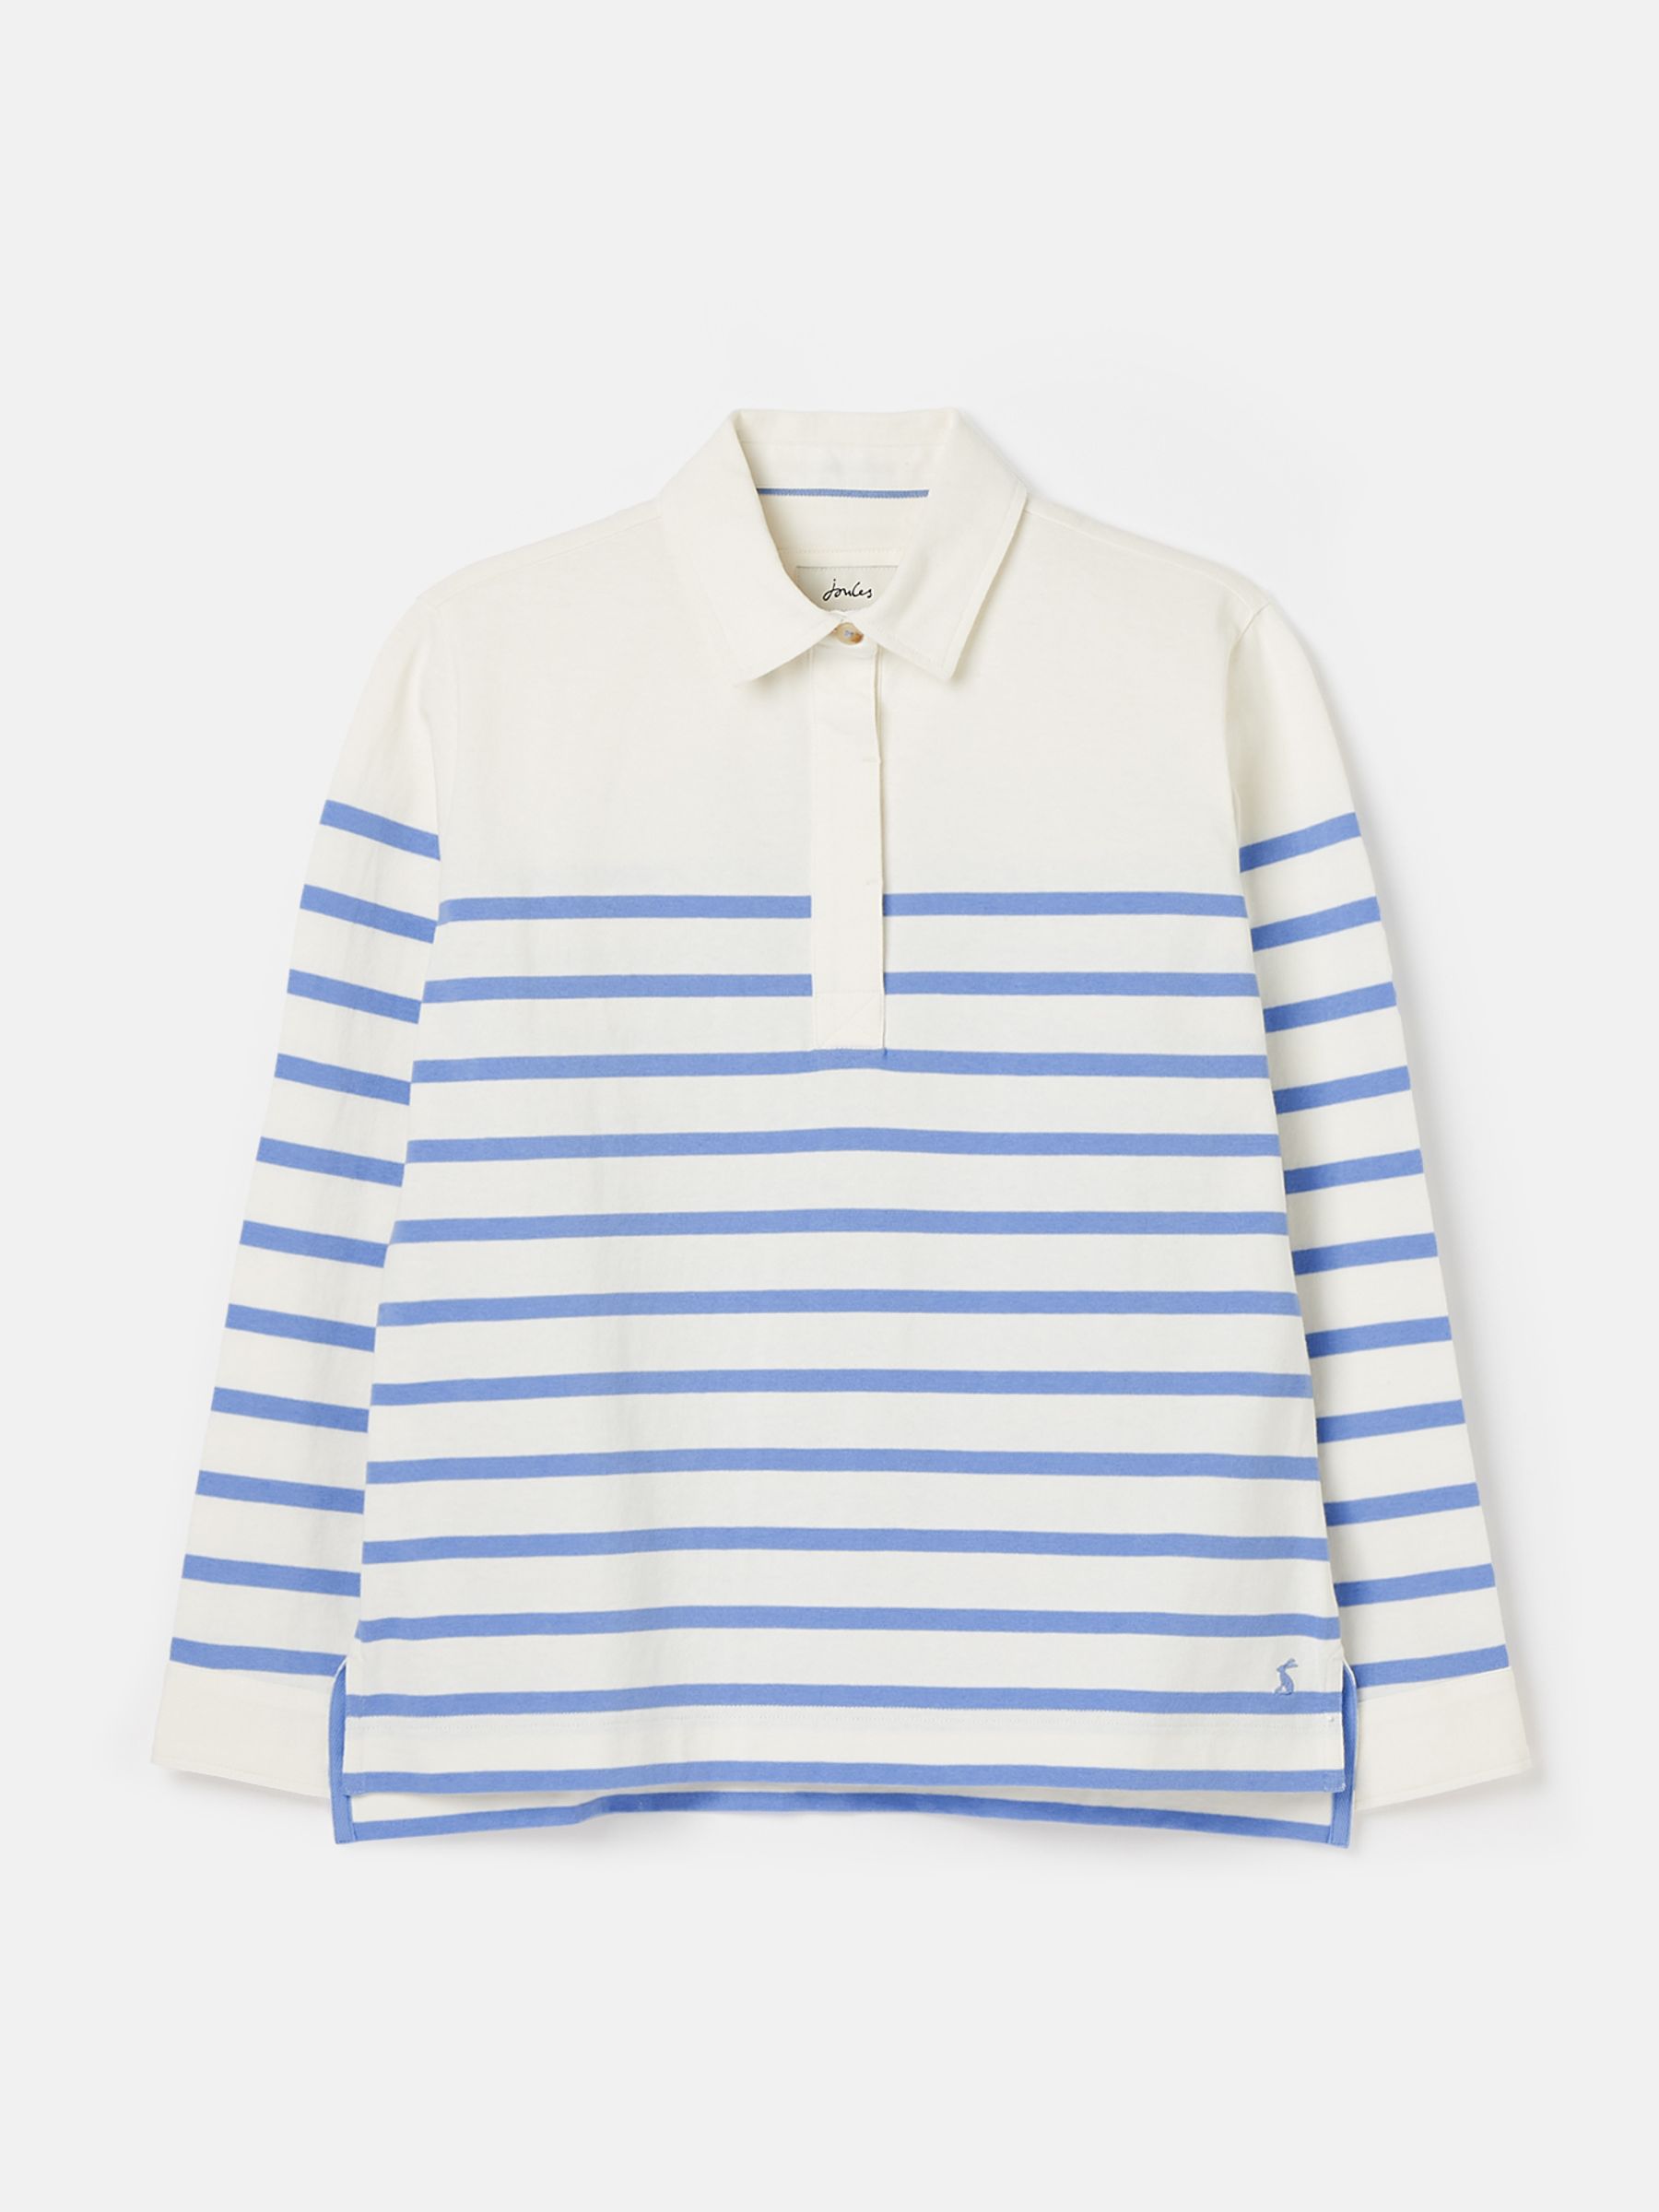 Buy Ottilie Blue Striped Deck Sweat Top from the Joules online shop